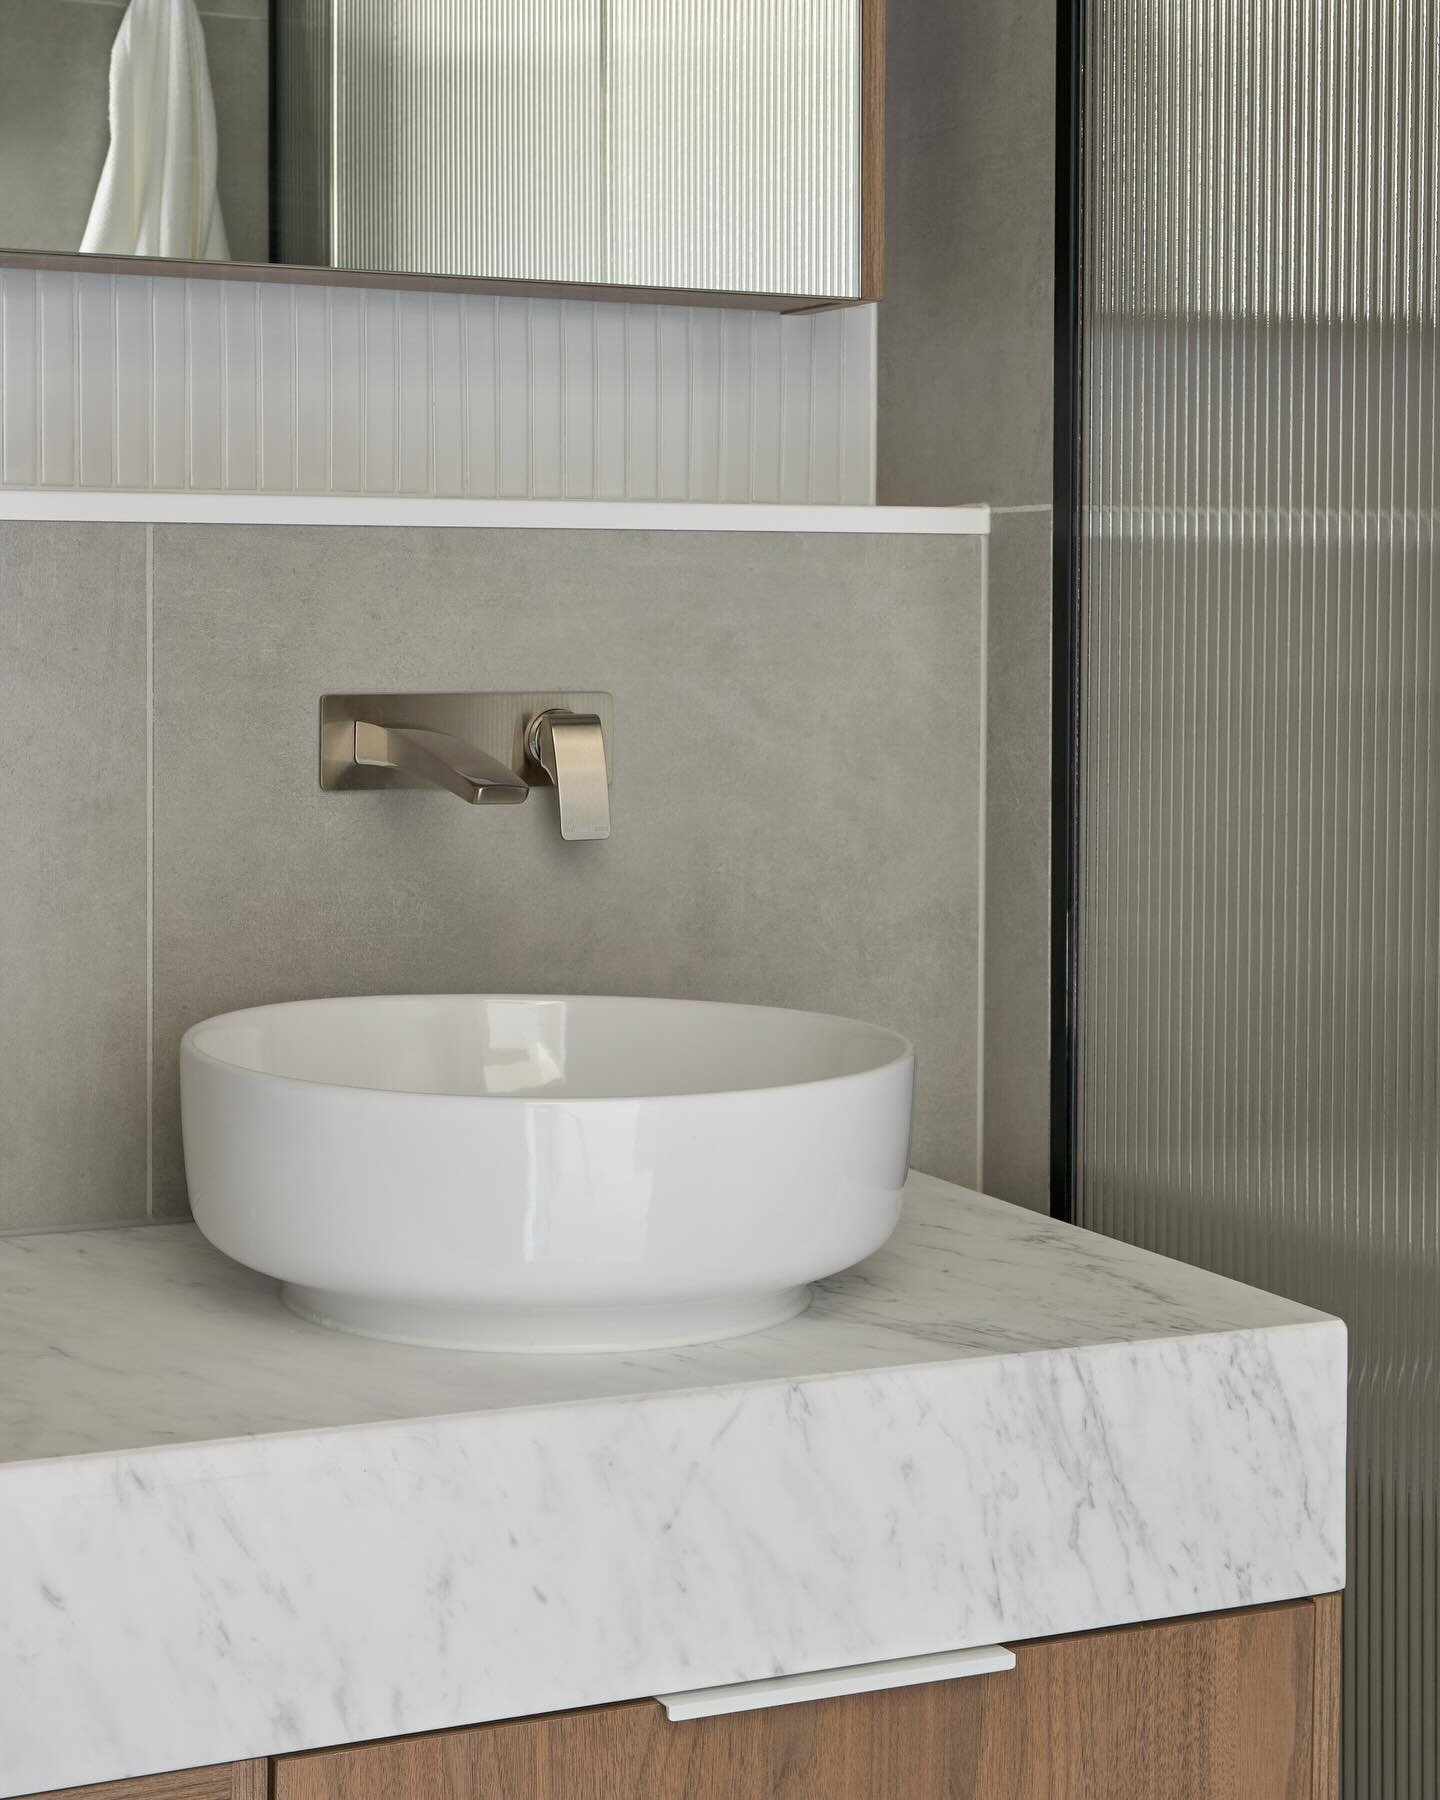 The use of Elba stone and textured timber laminate continued into the ensuite and bathroom for this custom apartment at Noir Northcote, the fluted glass continuing the theme set in the living room joinery. Lightly mottled grey tiles and Kit Kat tiles